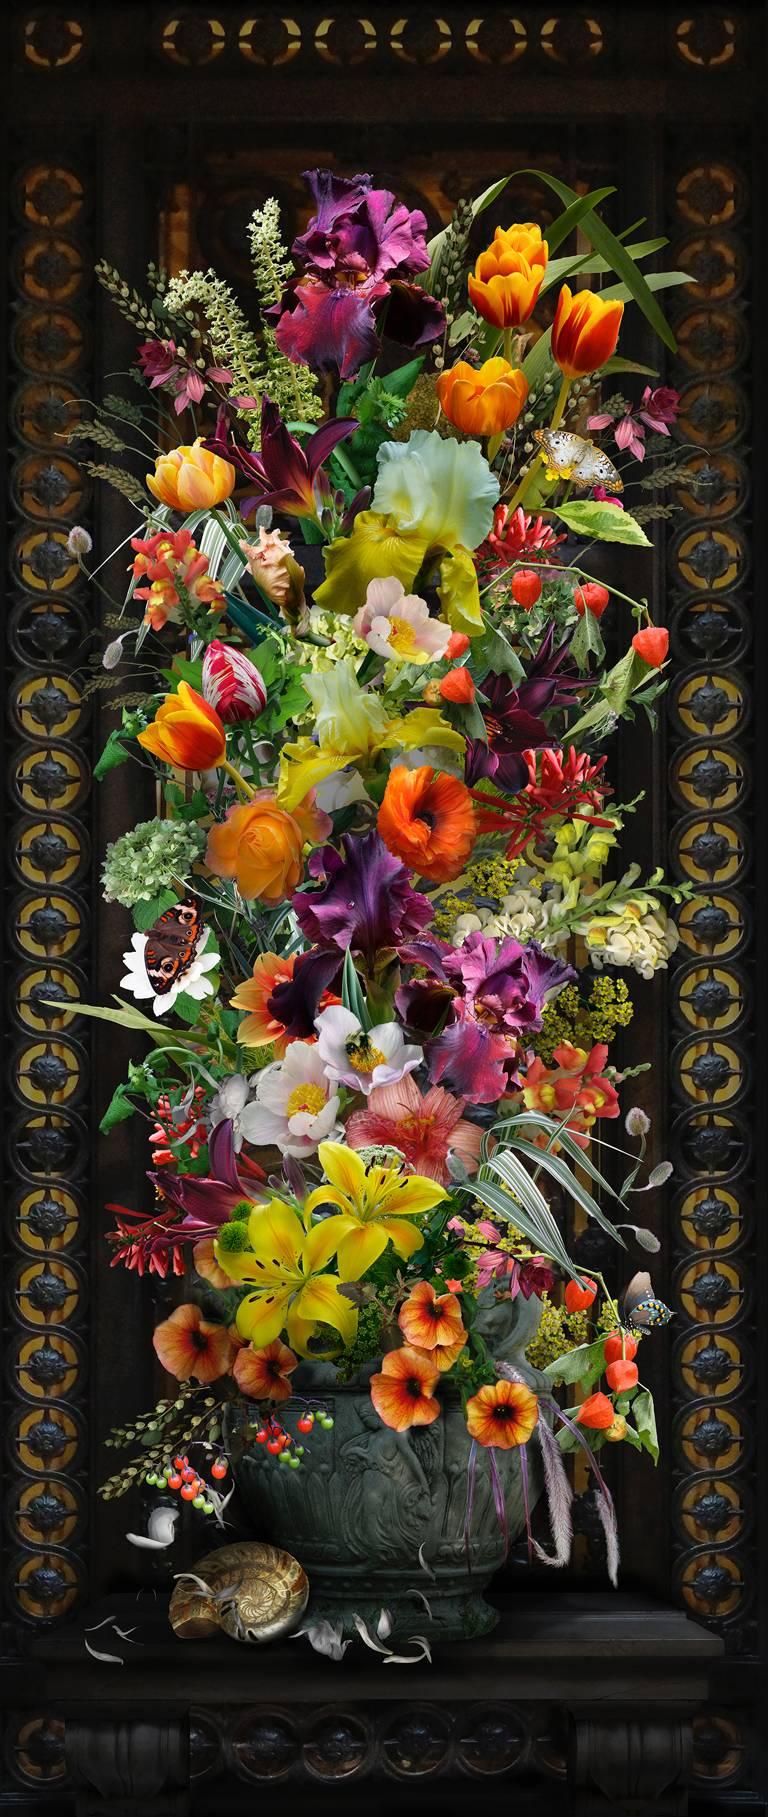 Ironwork (Vertical Digital Collage Print of Brightly Colored Flowers on Black)